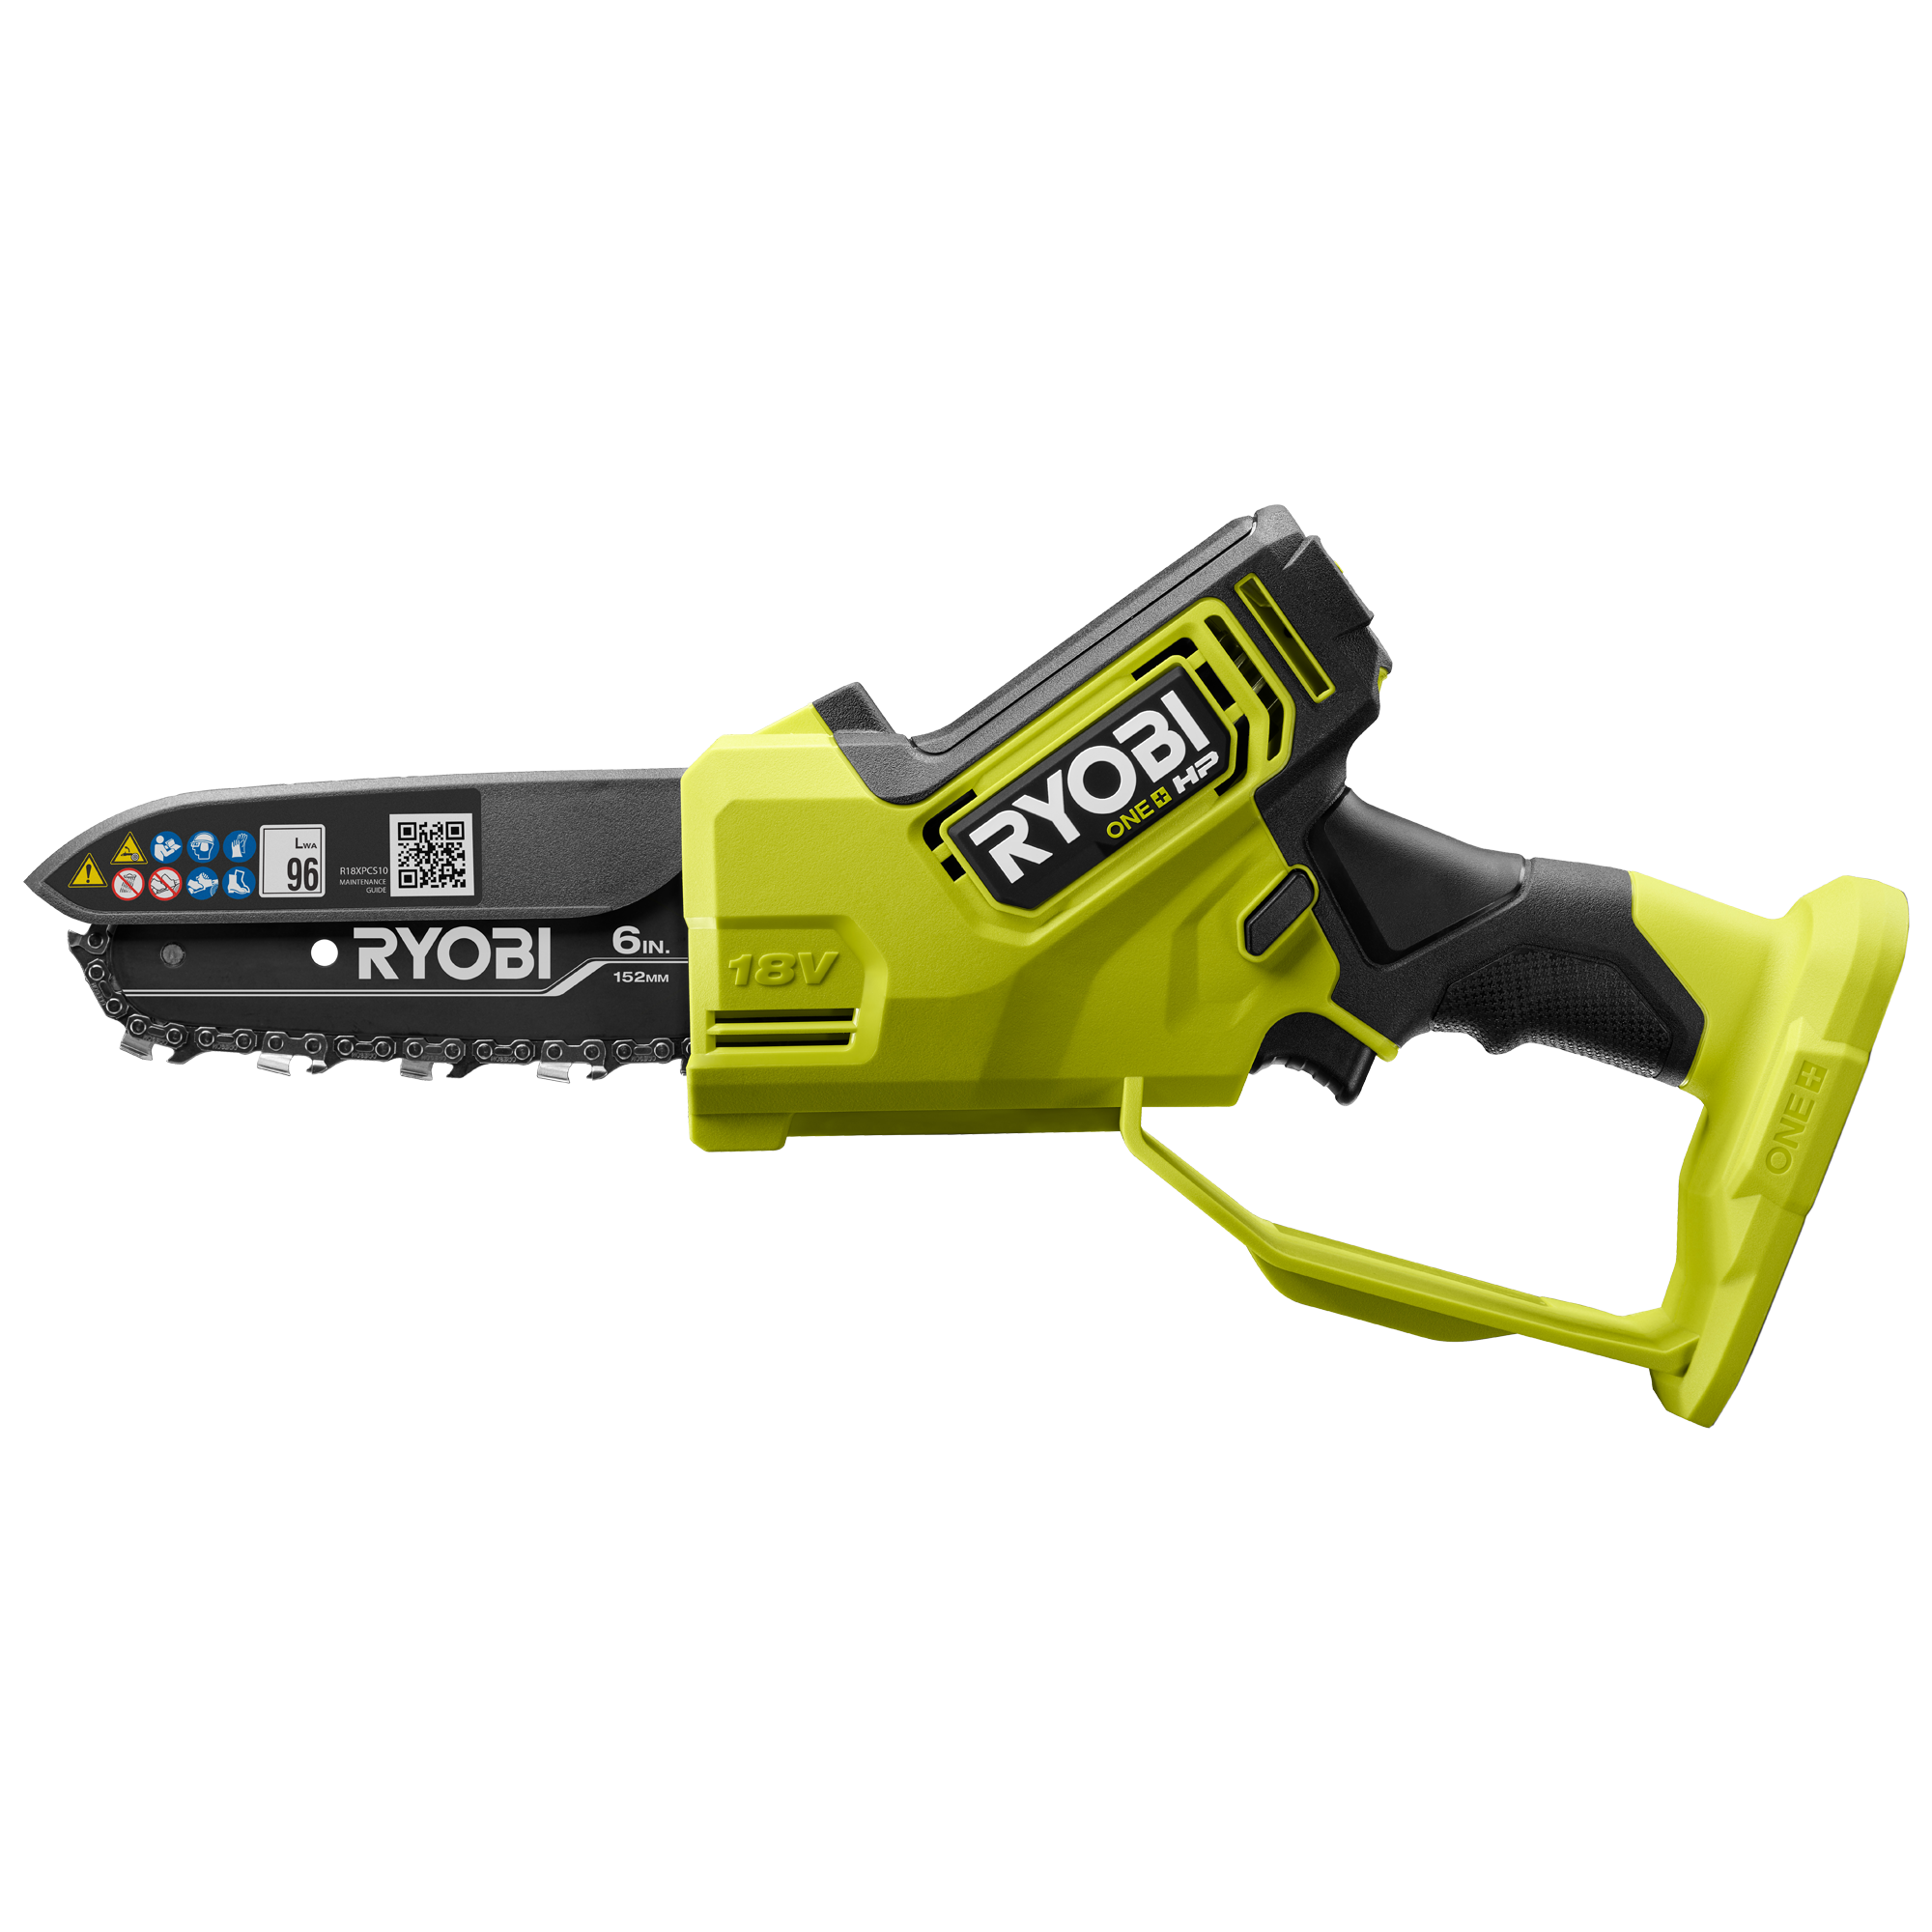 Ryobi 18V ONE PLUS Compact Brushless Cordless One-Handed Reciprocating Saw  - Green (Tool Only) for sale online